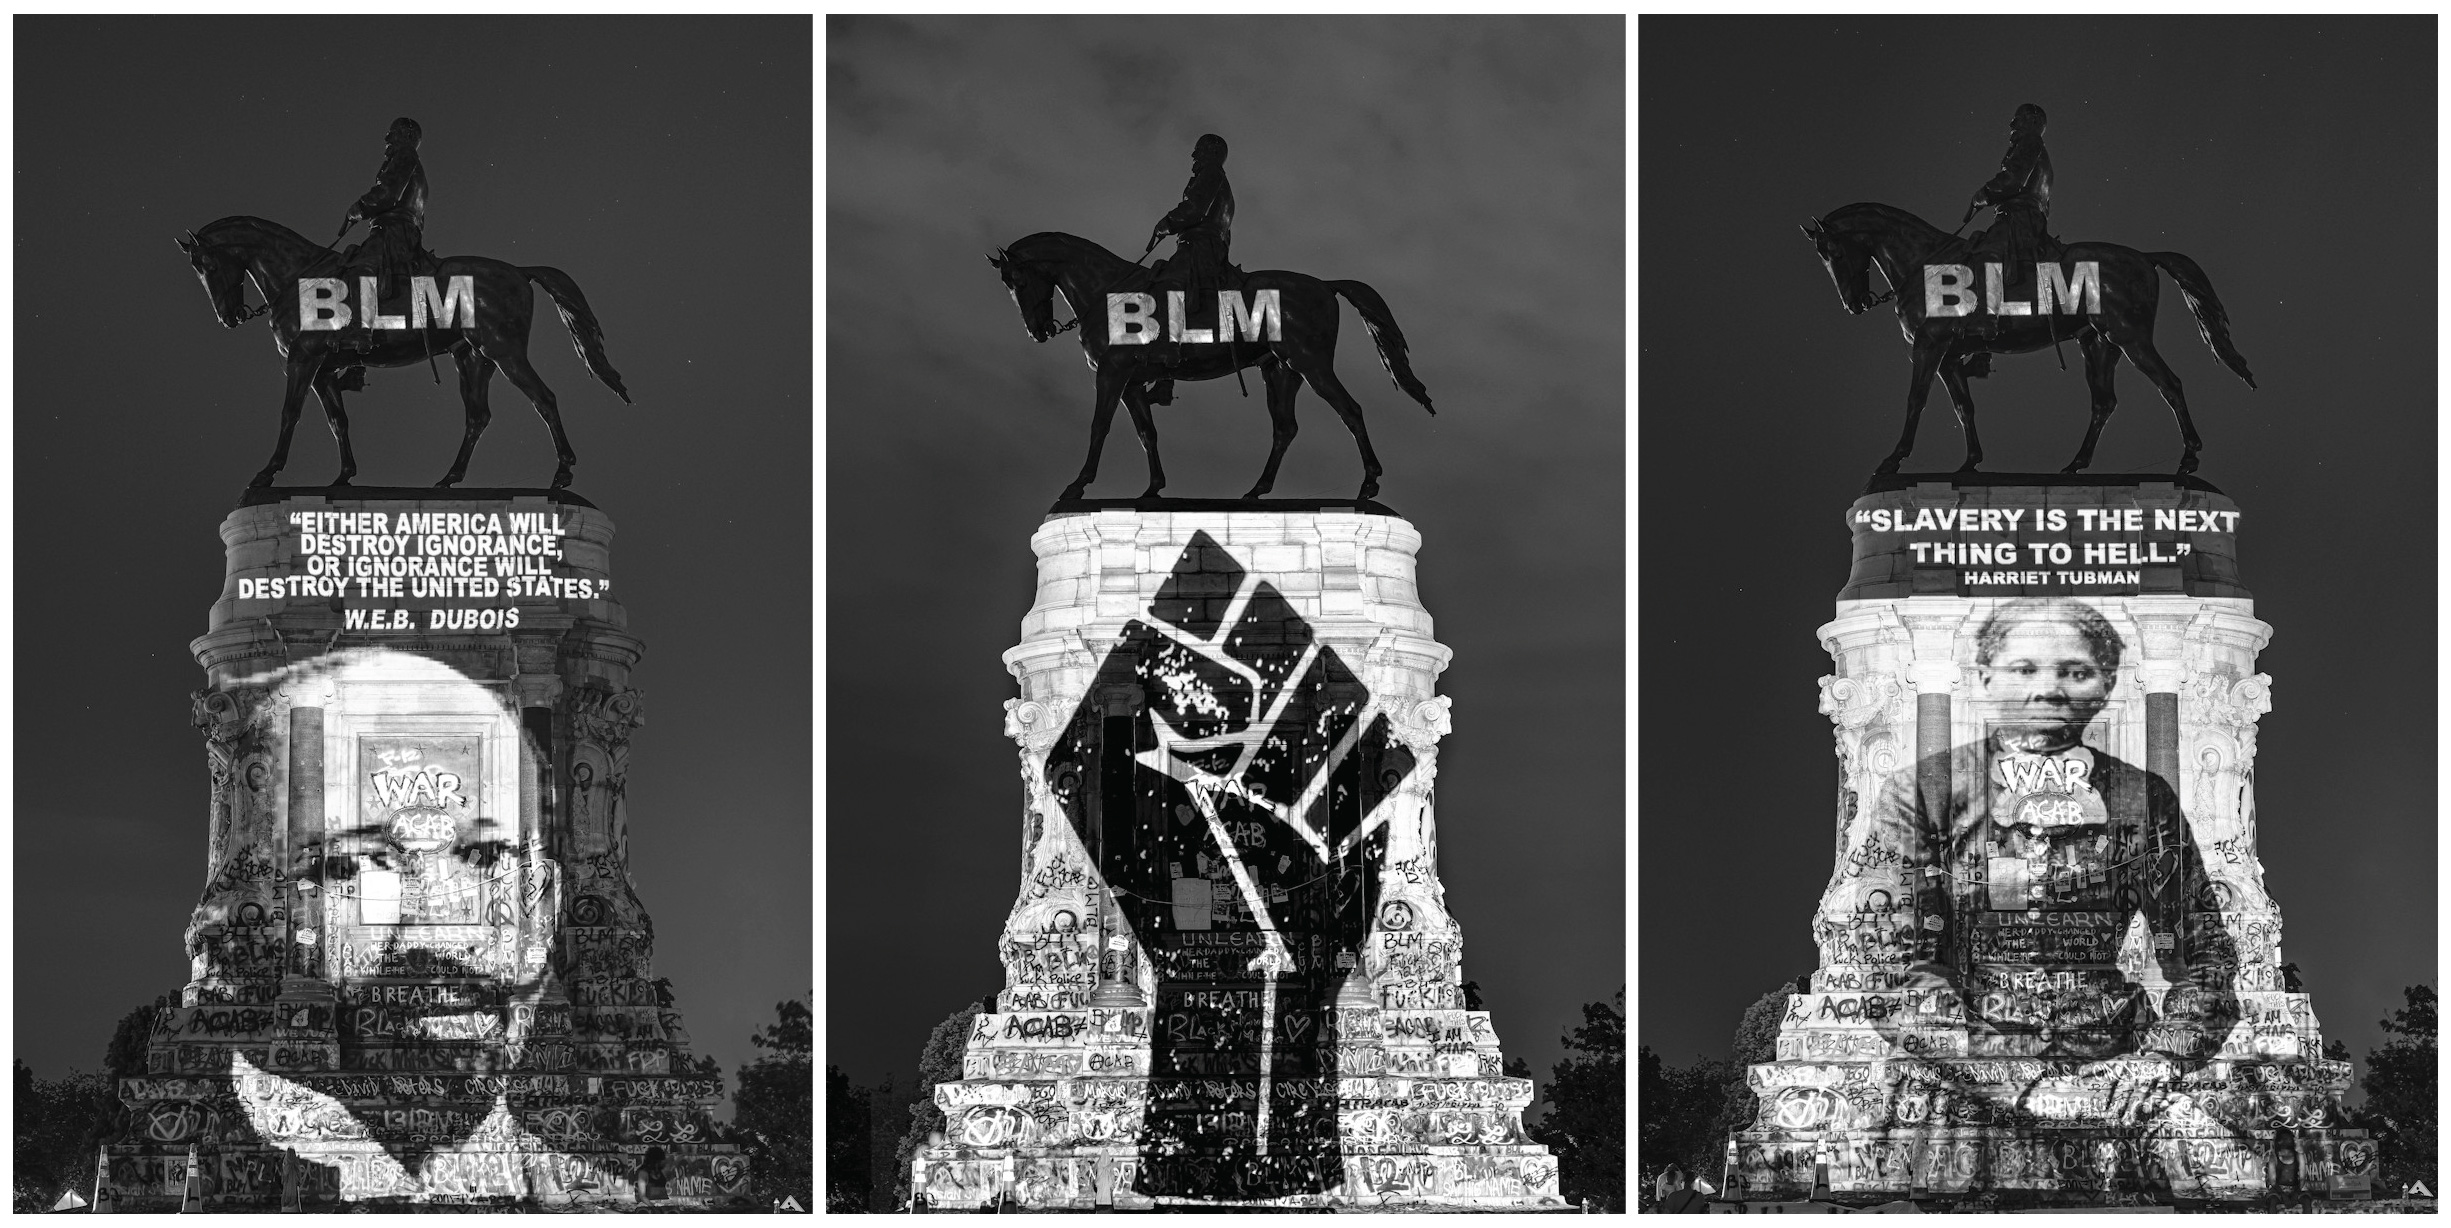 Reclaiming the Monument